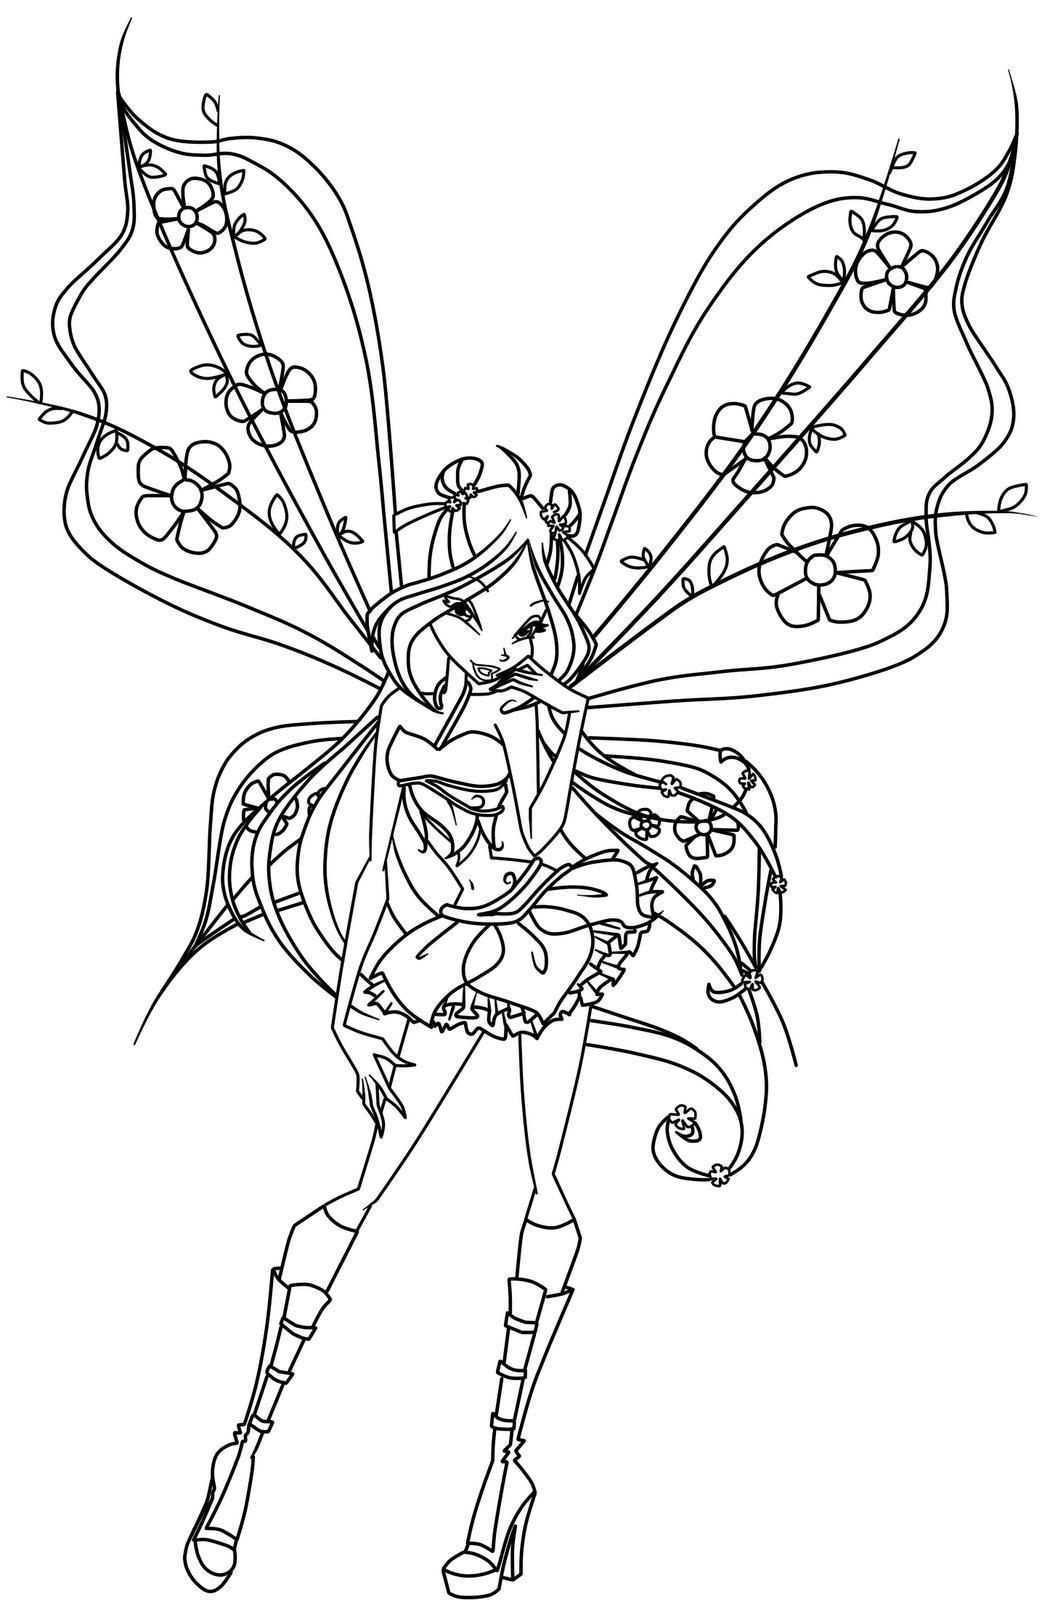 The Winx Club Photo Coloring Pages Fairy Coloring Pages Fairy Coloring Fairy Coloring